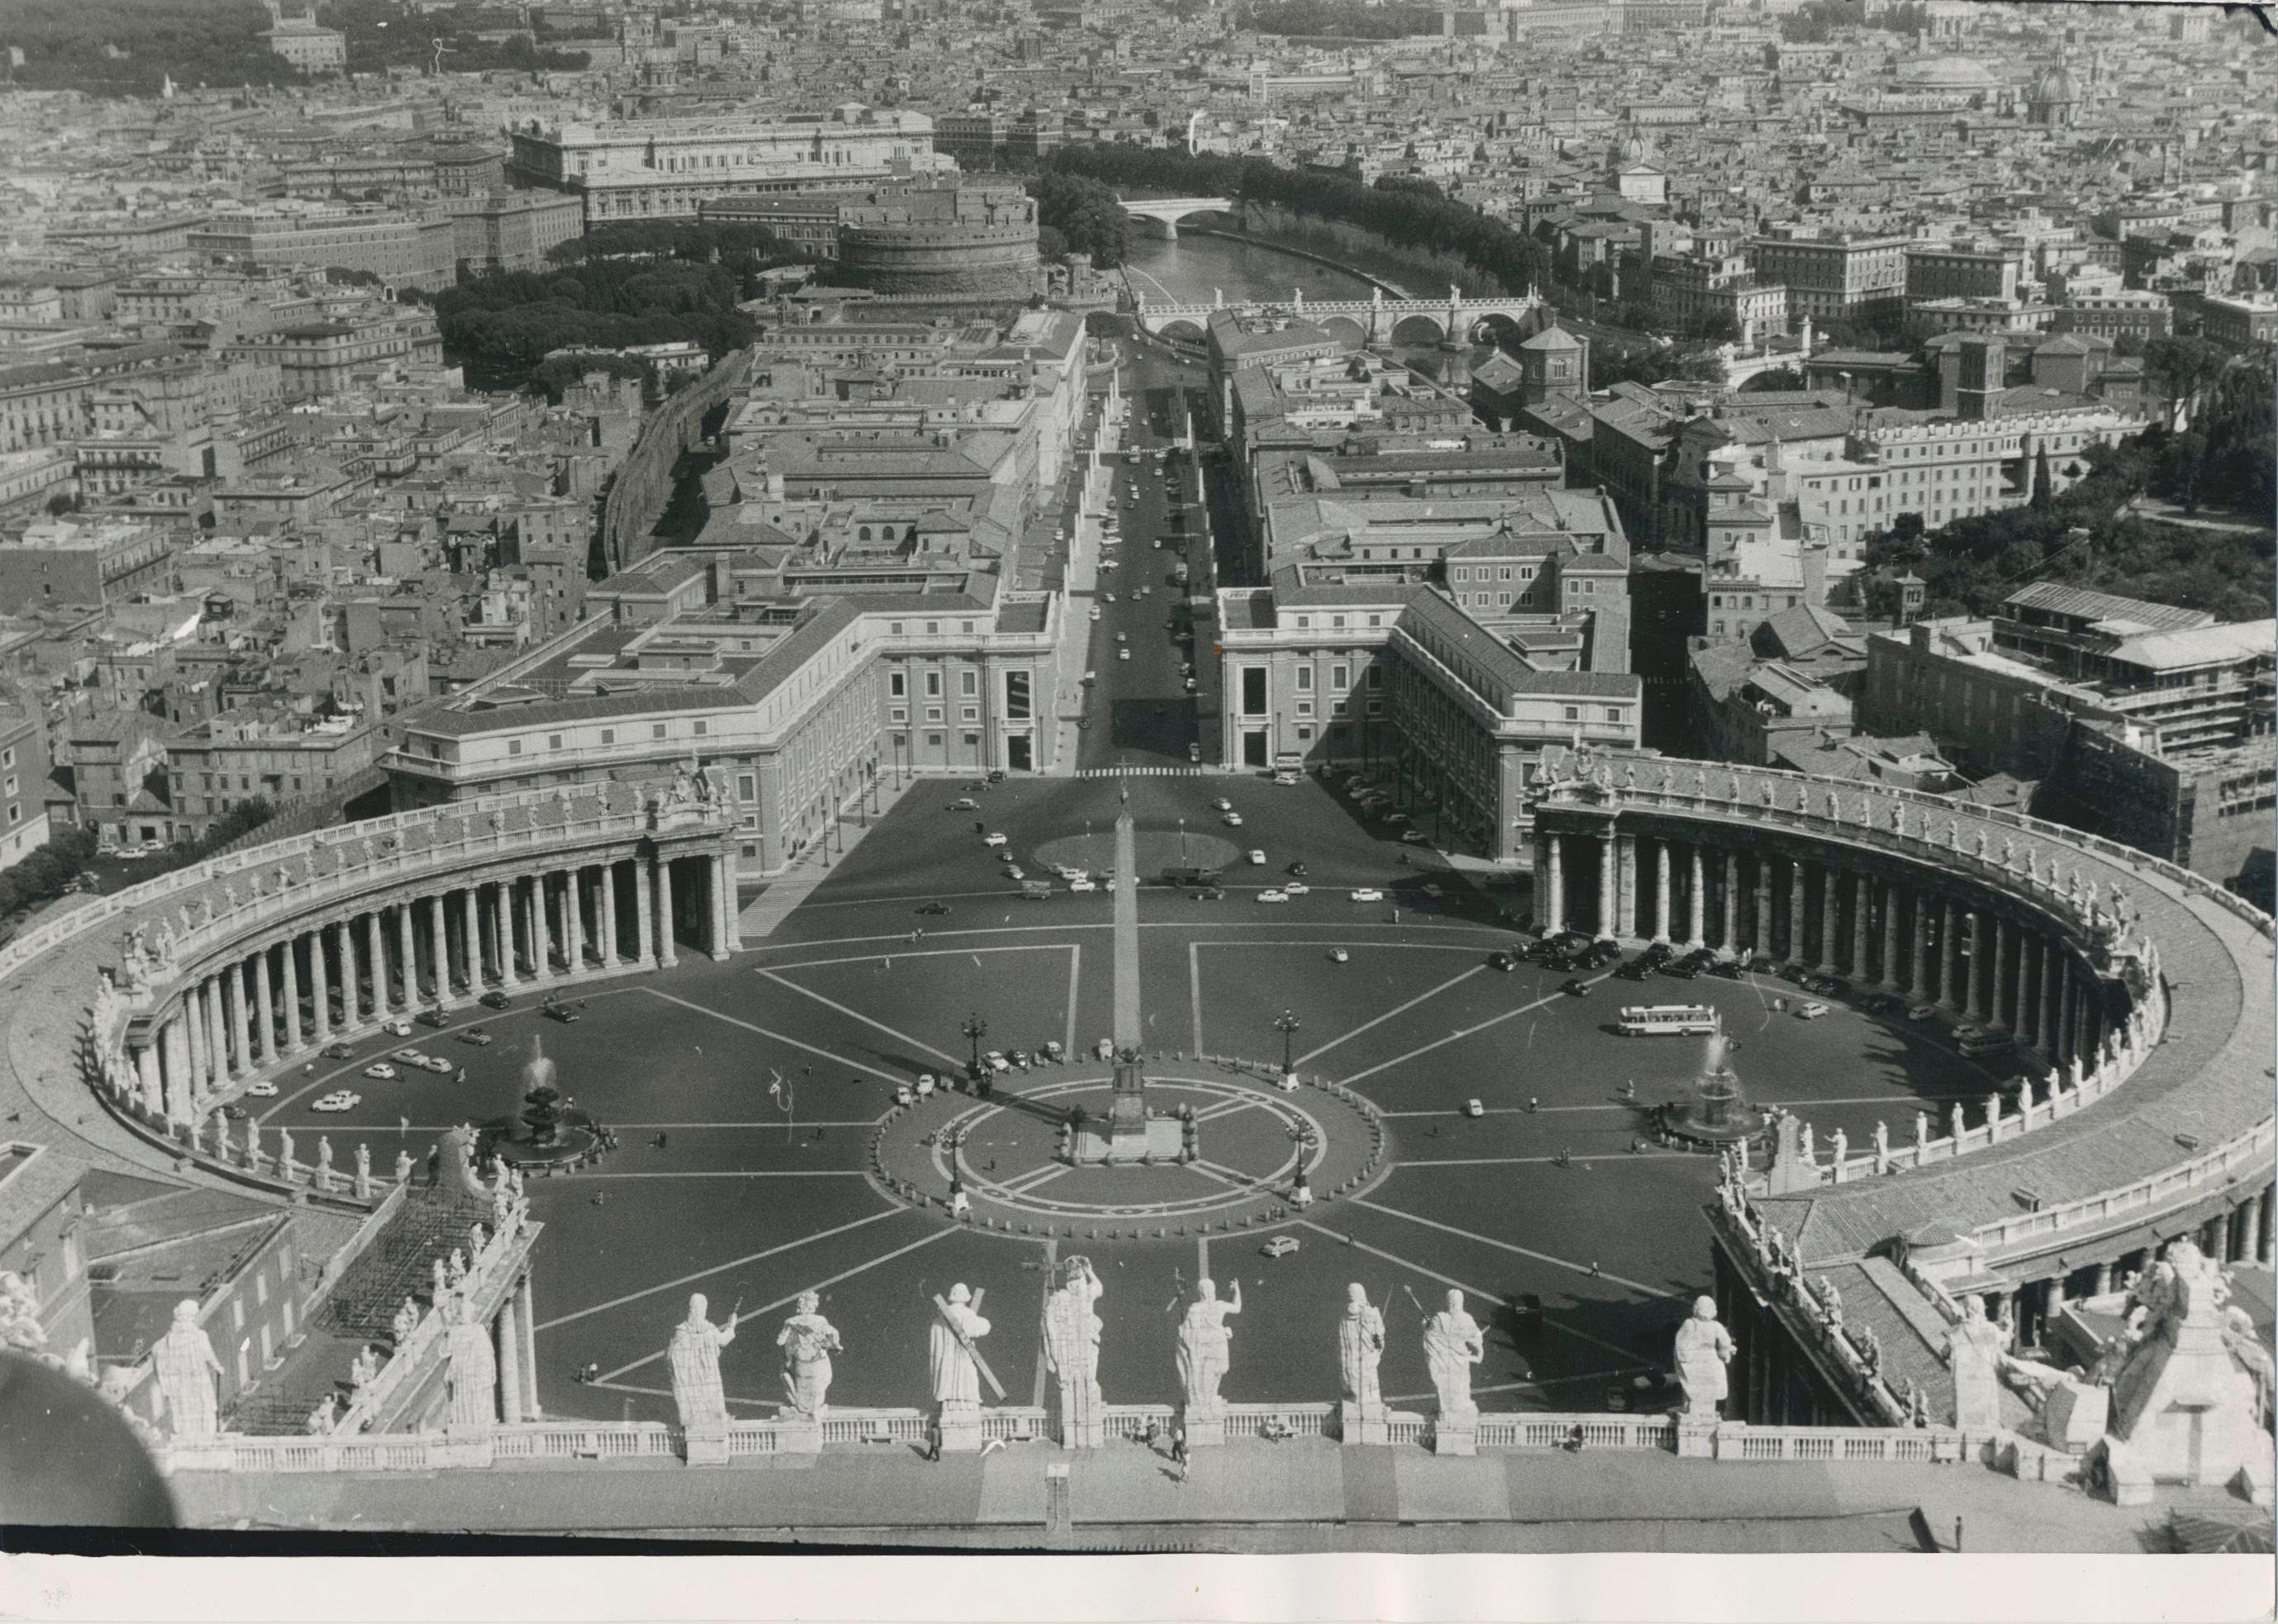 Erich Andres Black and White Photograph - St. Peter's Square Rome, Black and White, Italy 1950s; 16.6 x 23.4 cm